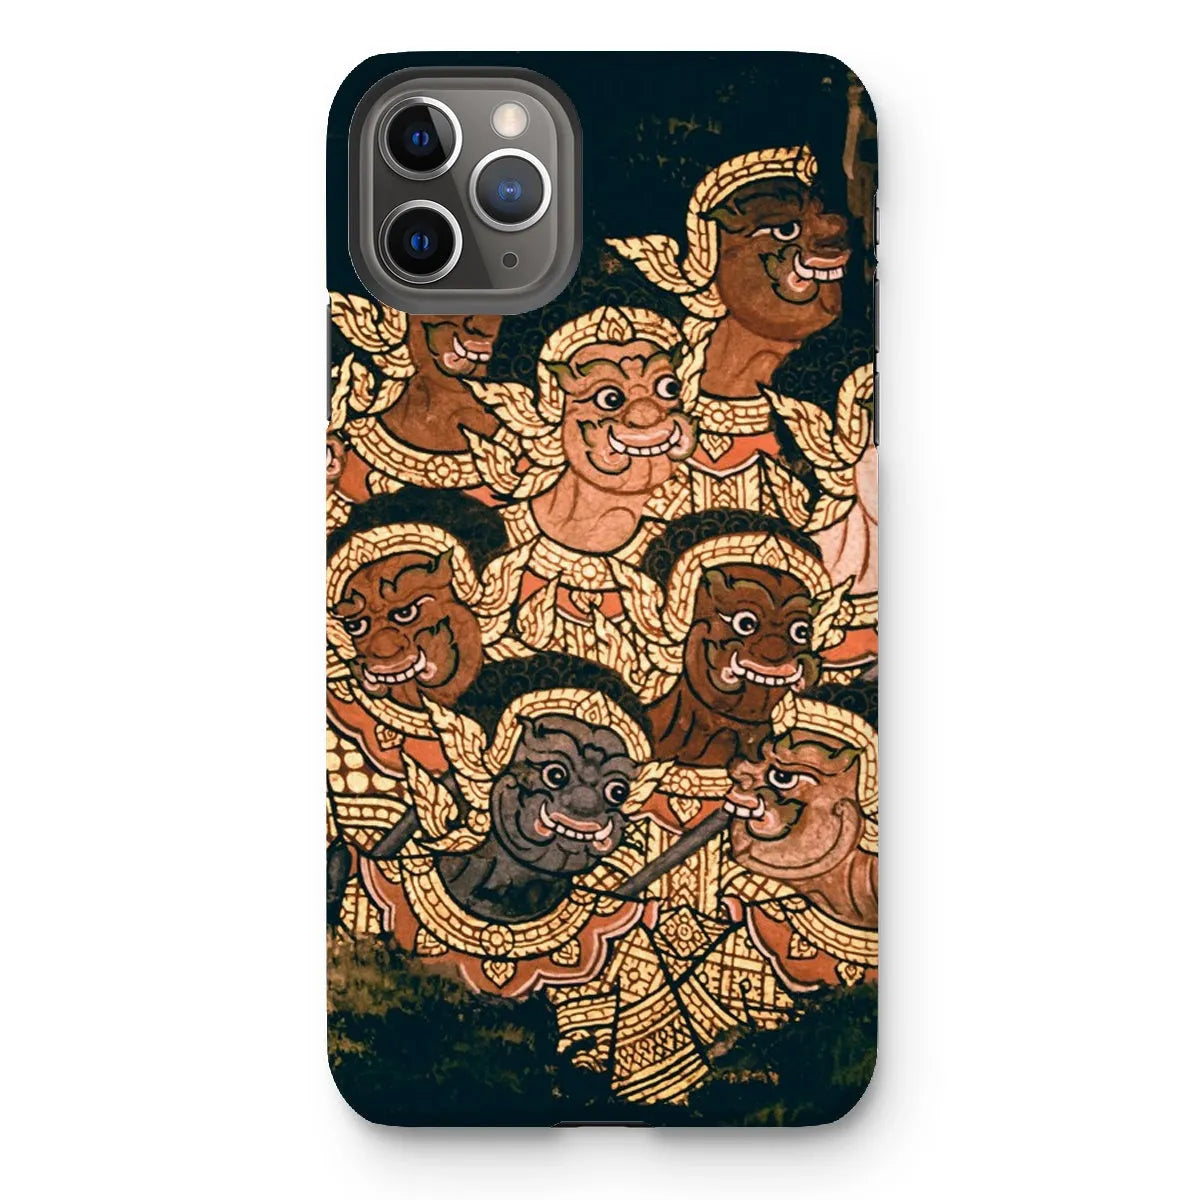 Babes In The Woods - Traditional Thai Myth Phone Case - Iphone 11 Pro Max / Matte - Mobile Phone Cases - Aesthetic Art